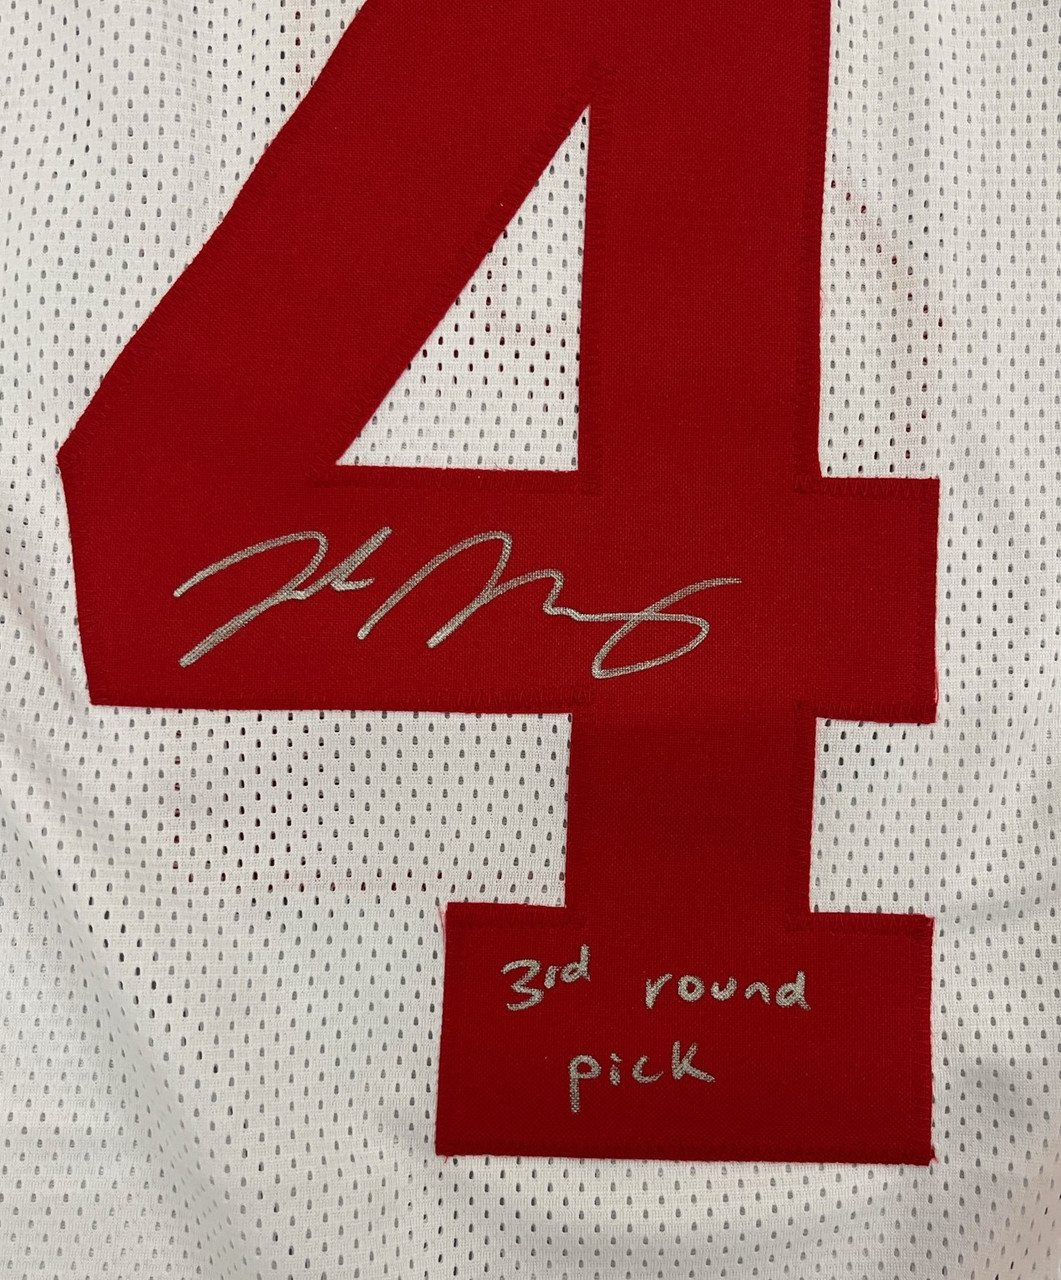 Jake Moody Signed Autographed San Francisco 49ers Jersey White